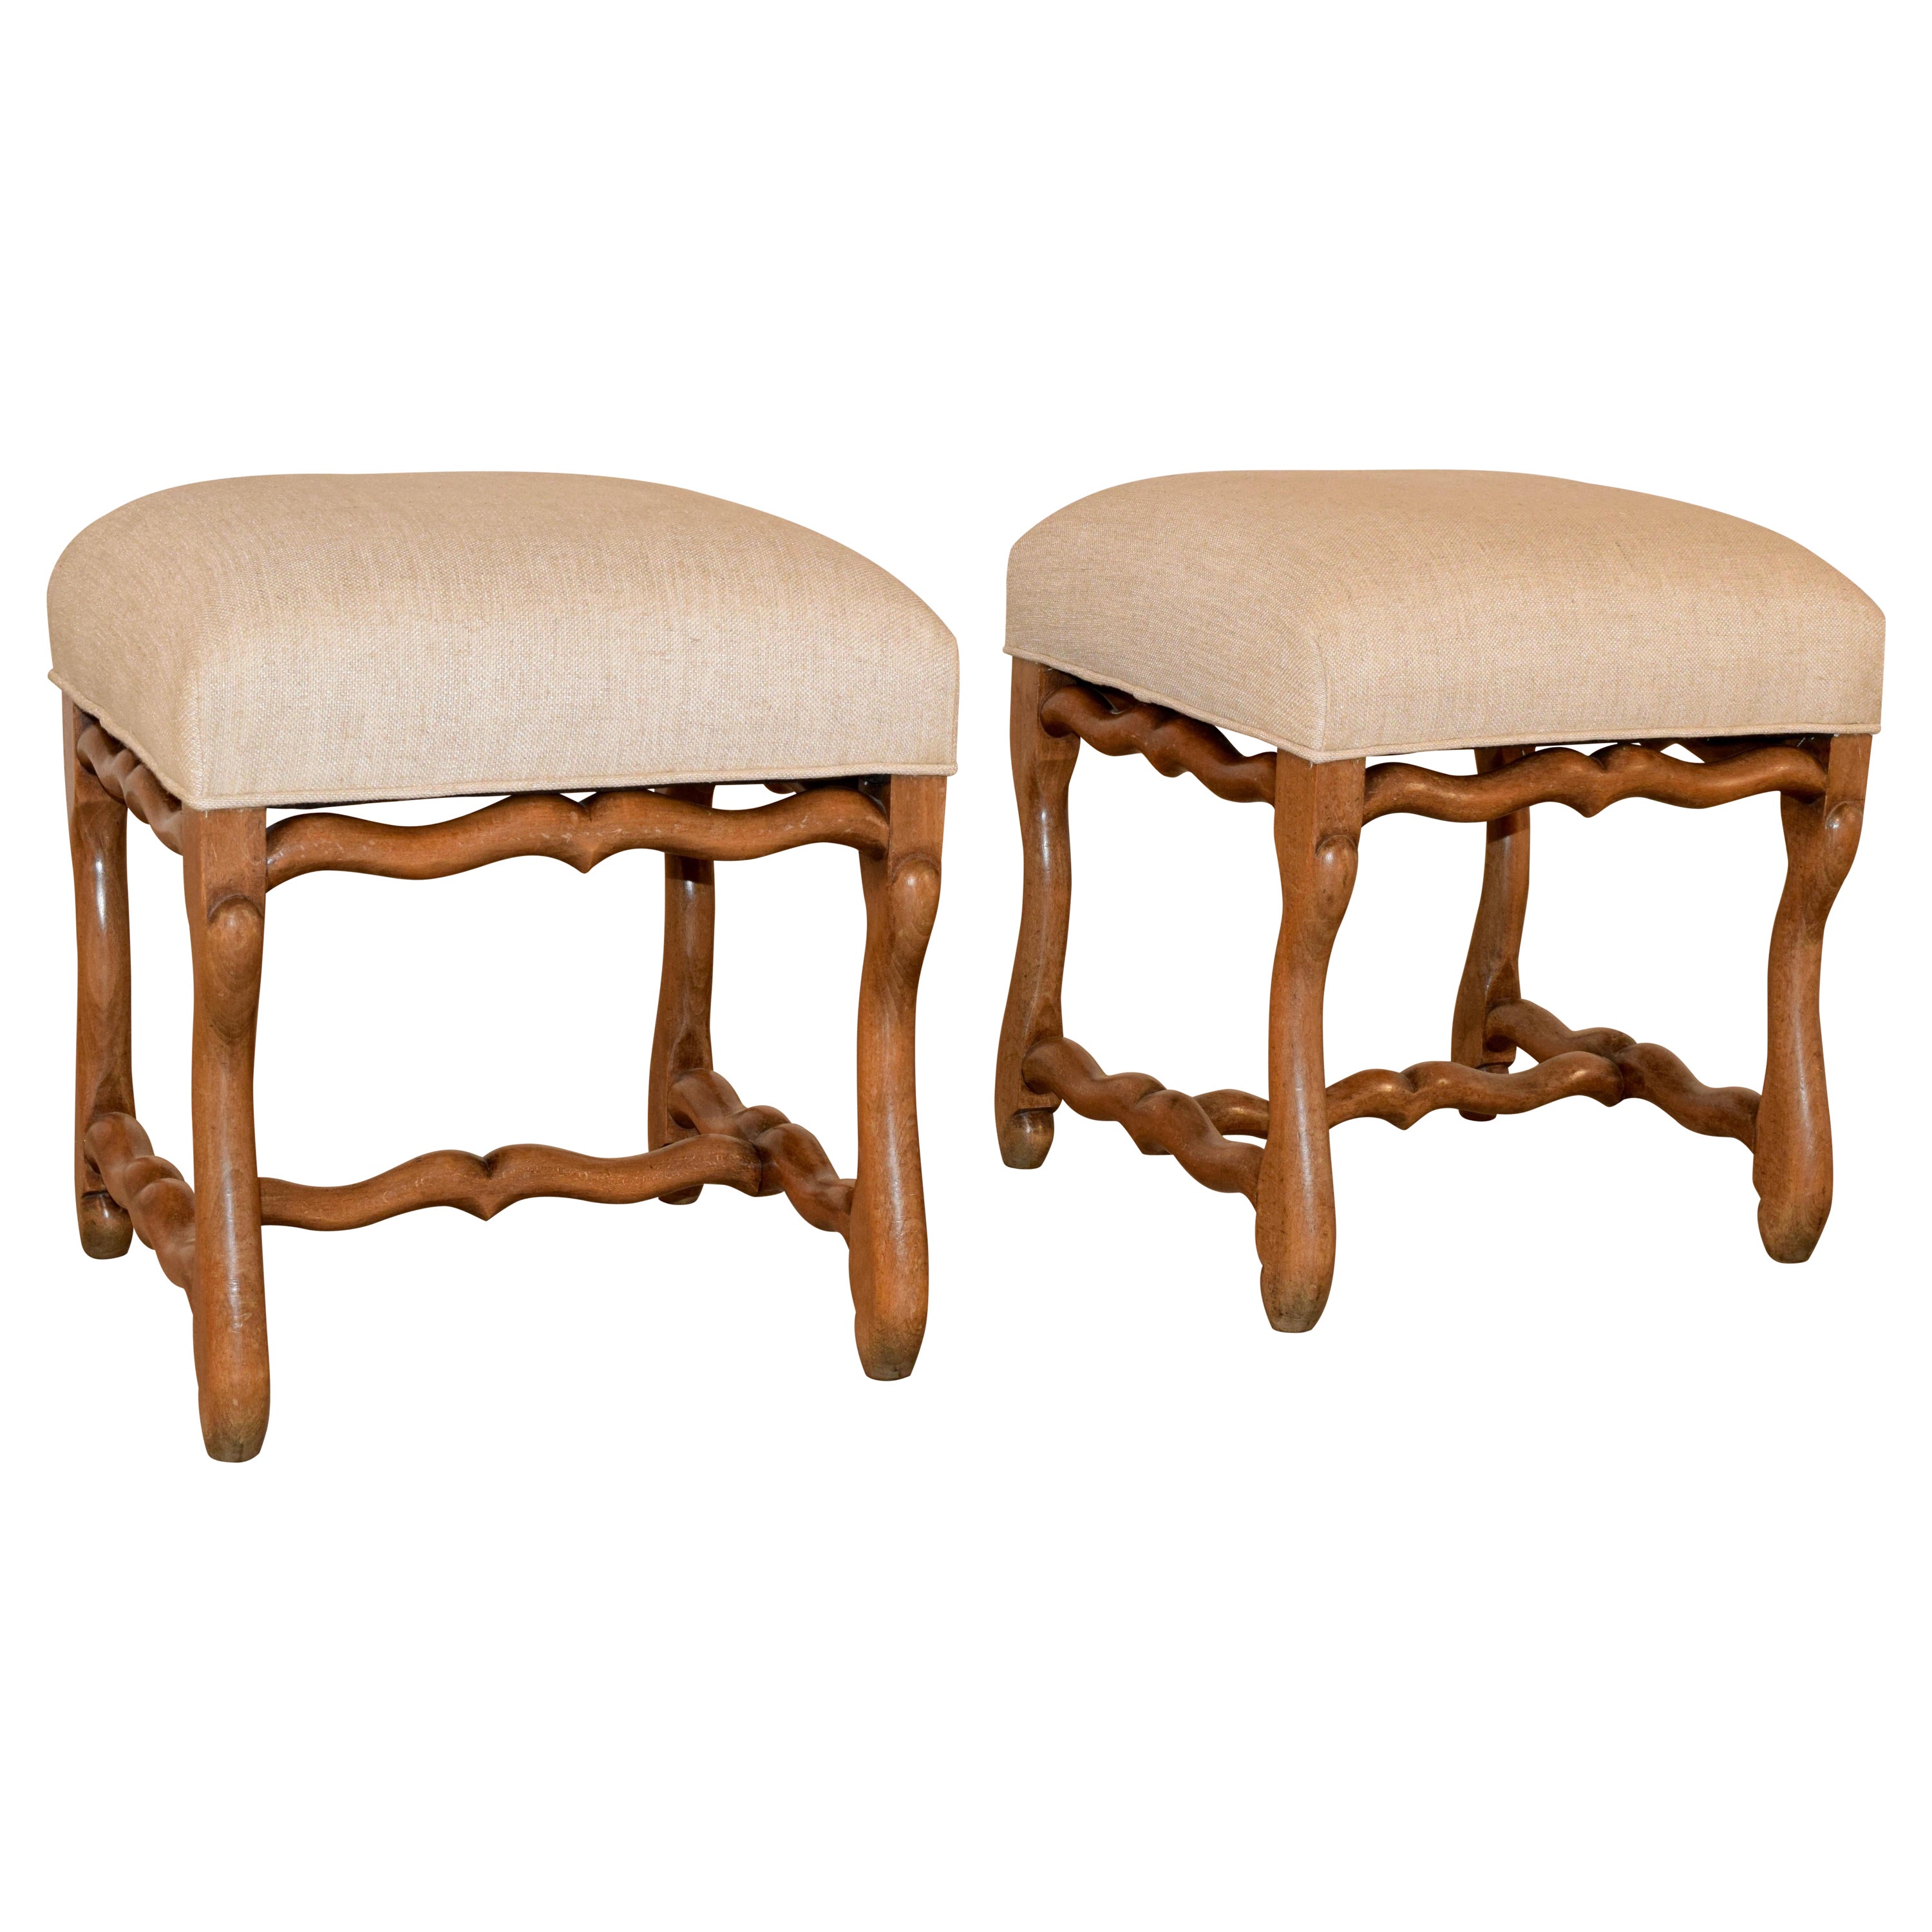 19th Century Pair of French Mutton Leg Stools